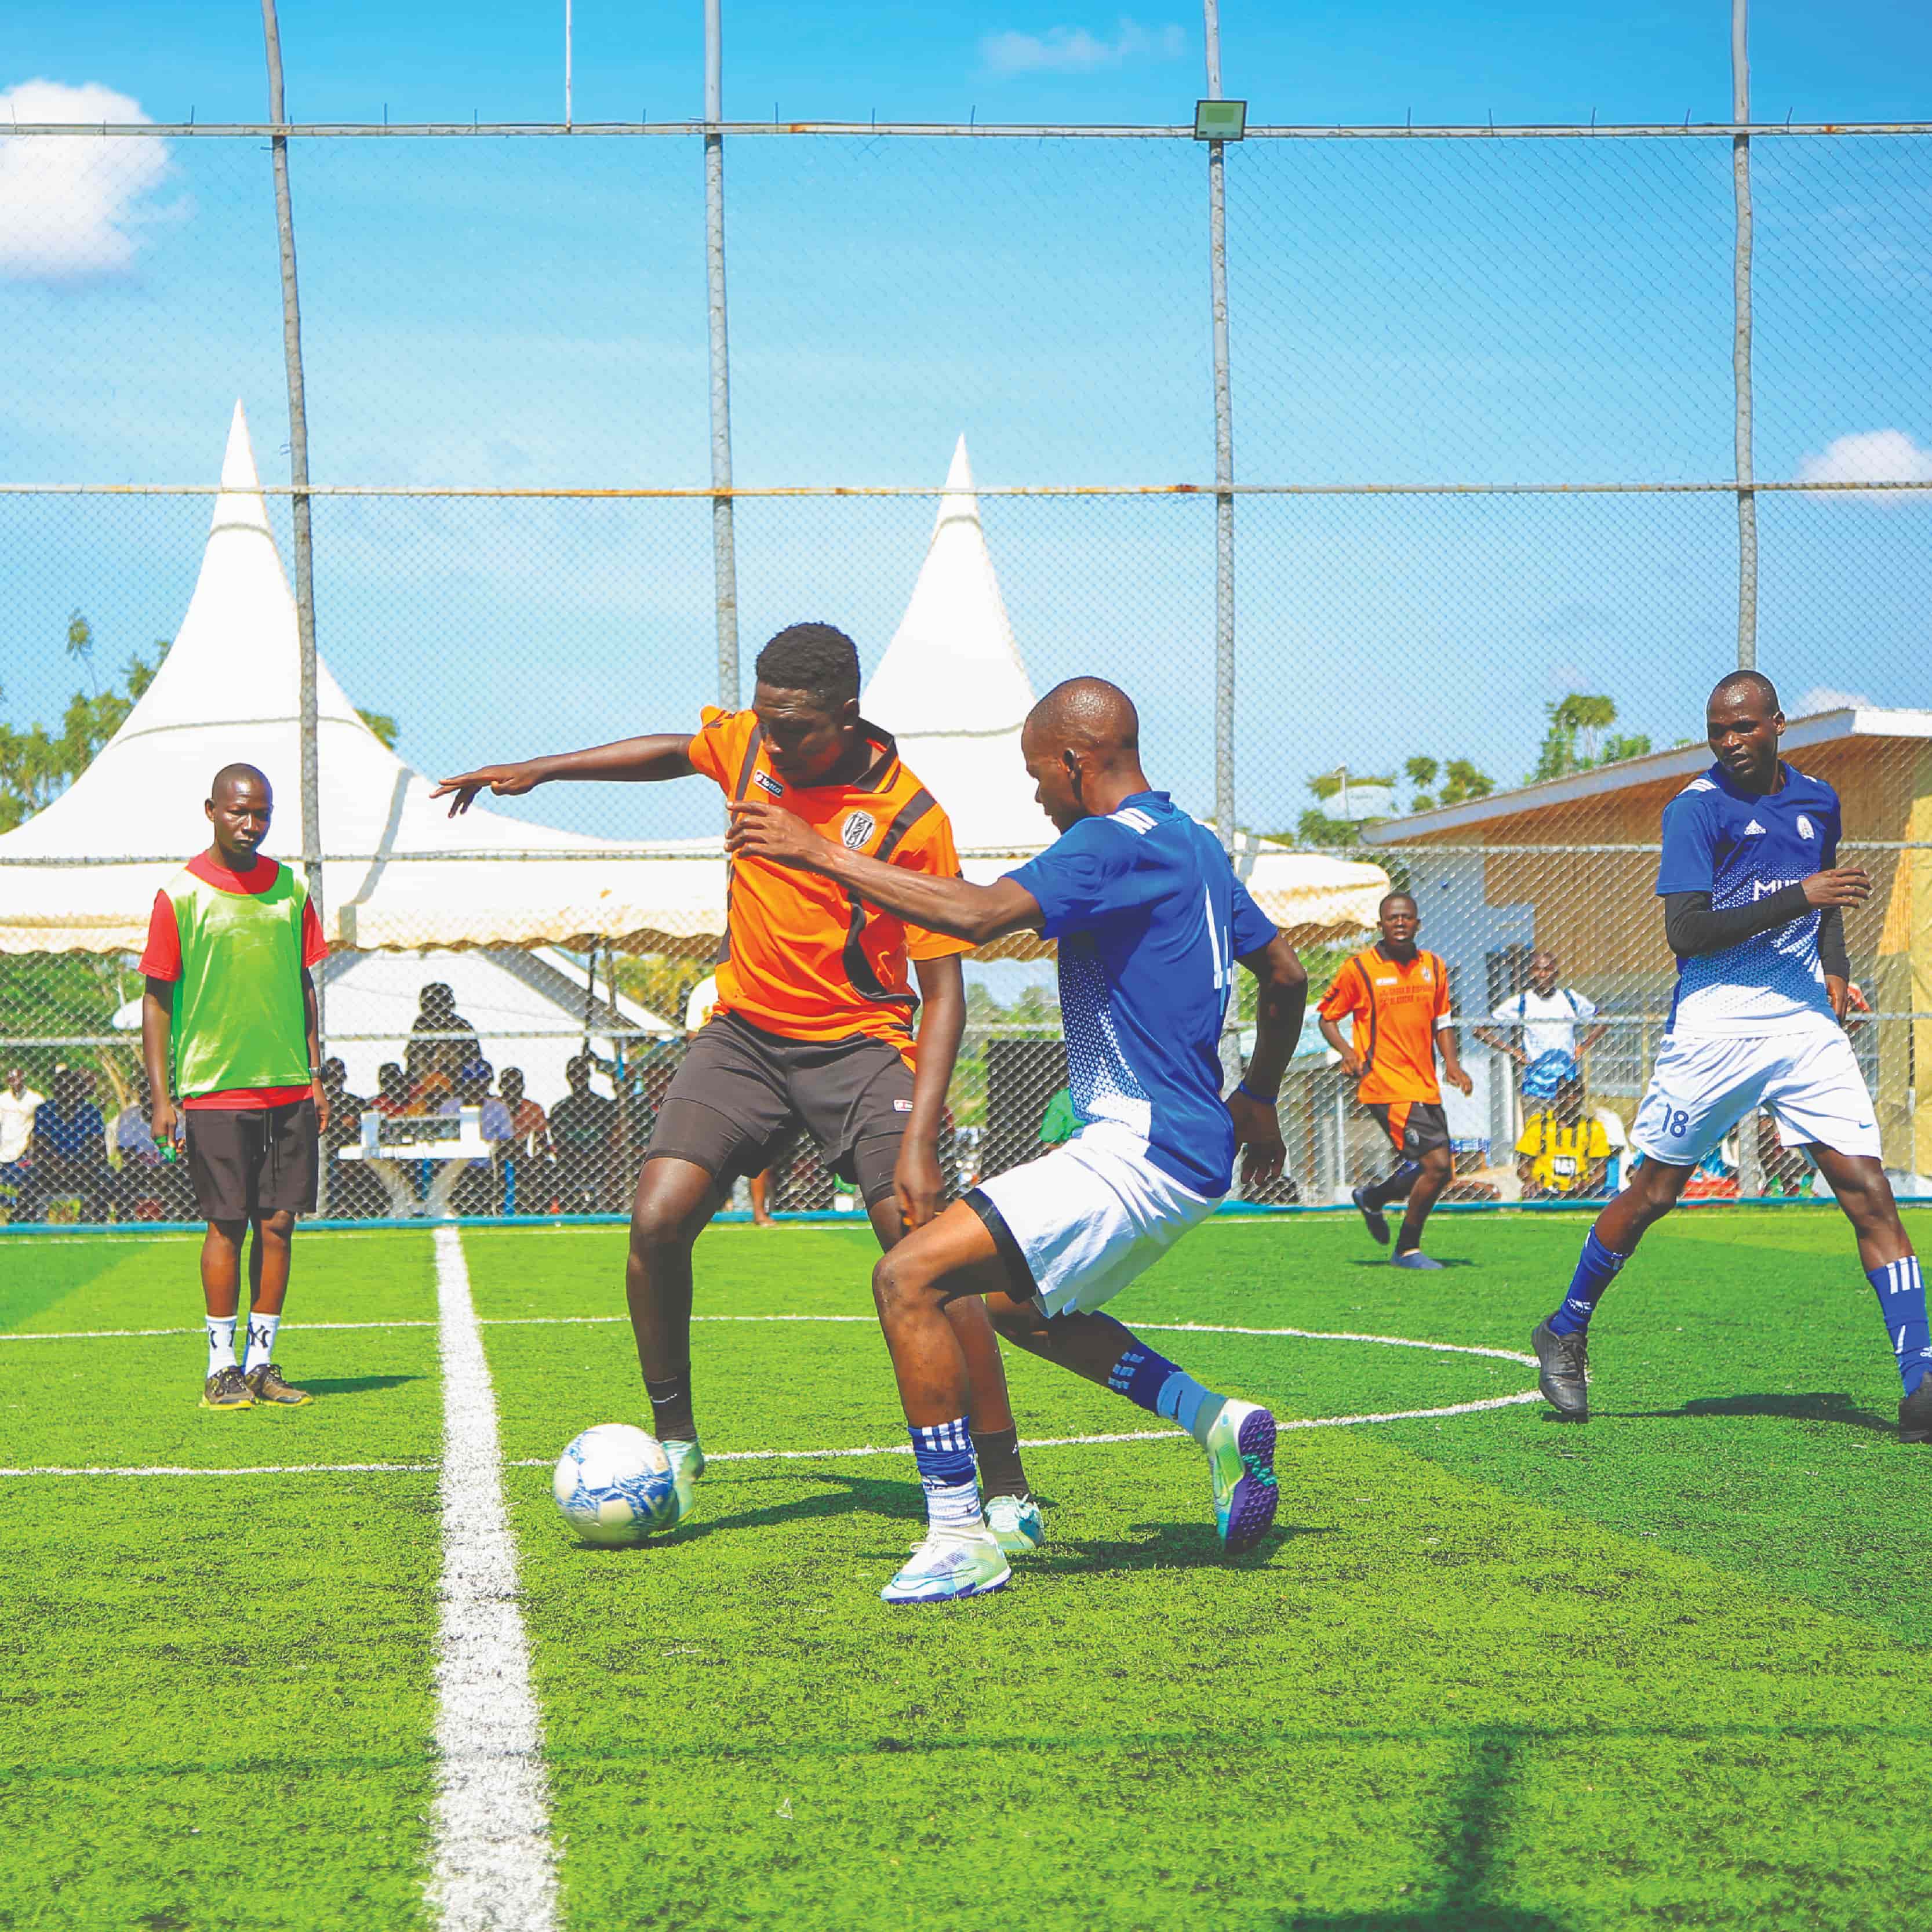 Image of players playing soccer on artificial turf